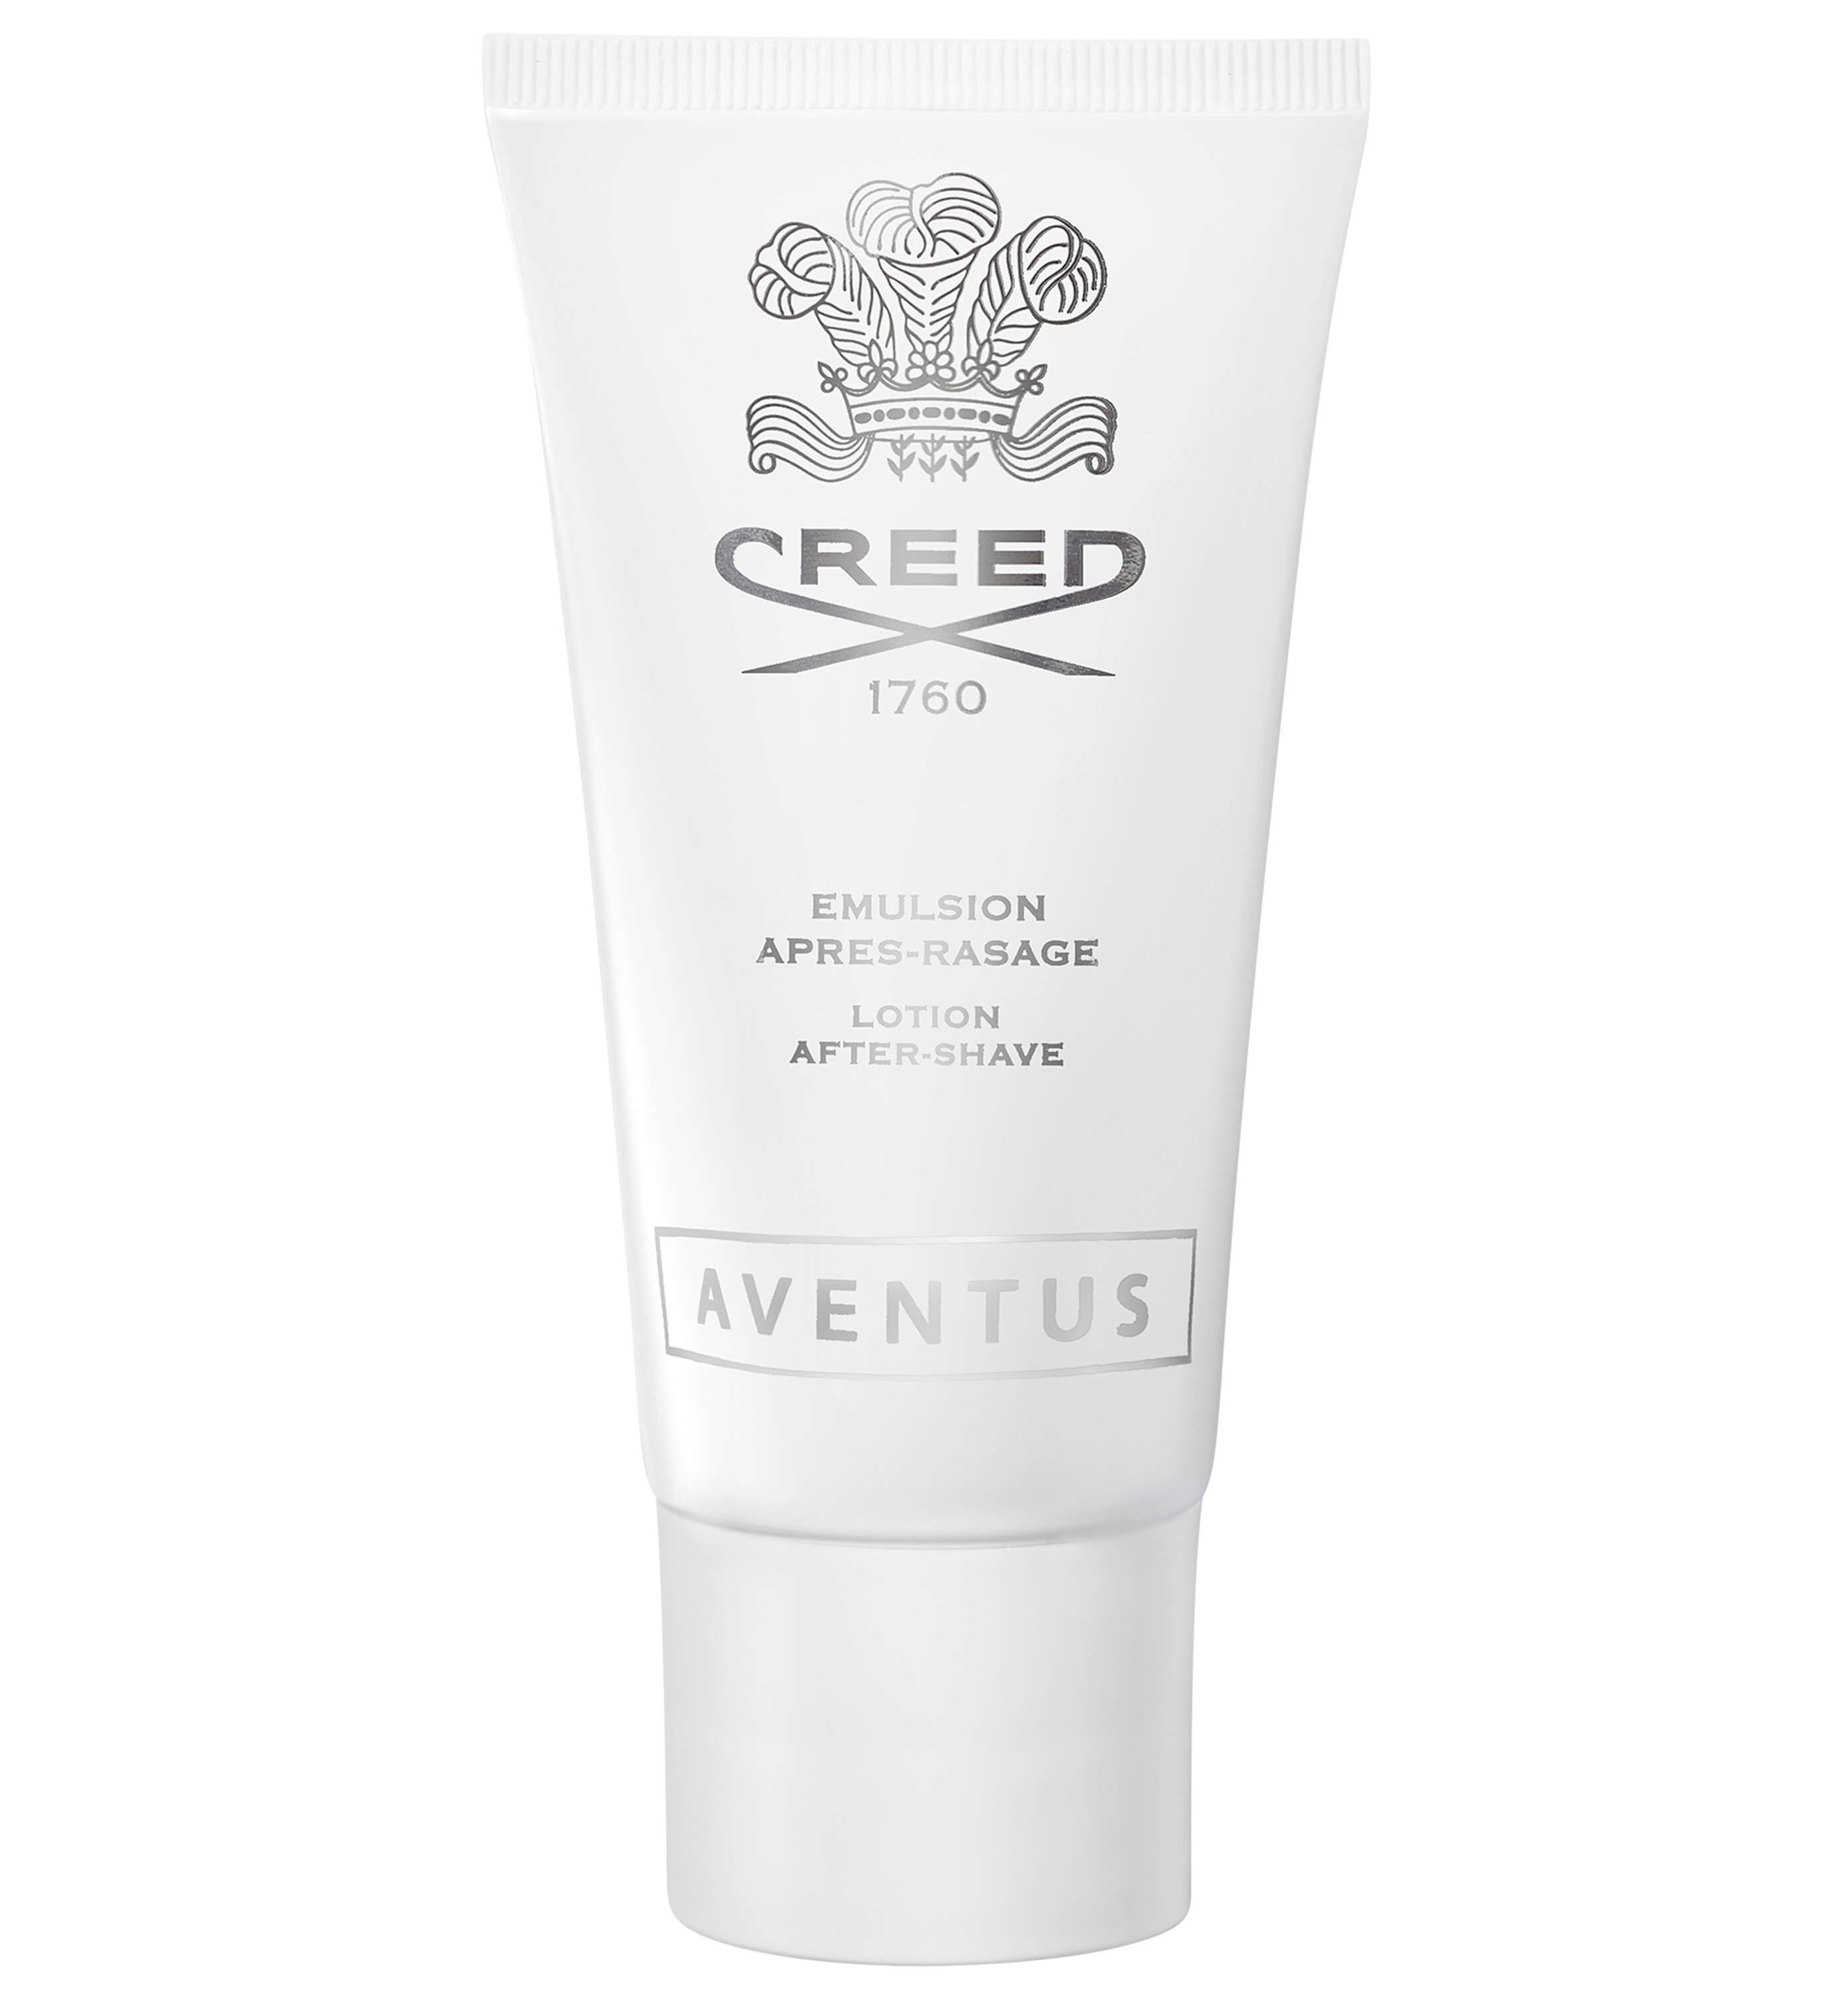 CREED Millesime for Men Aventus After Shave Balm